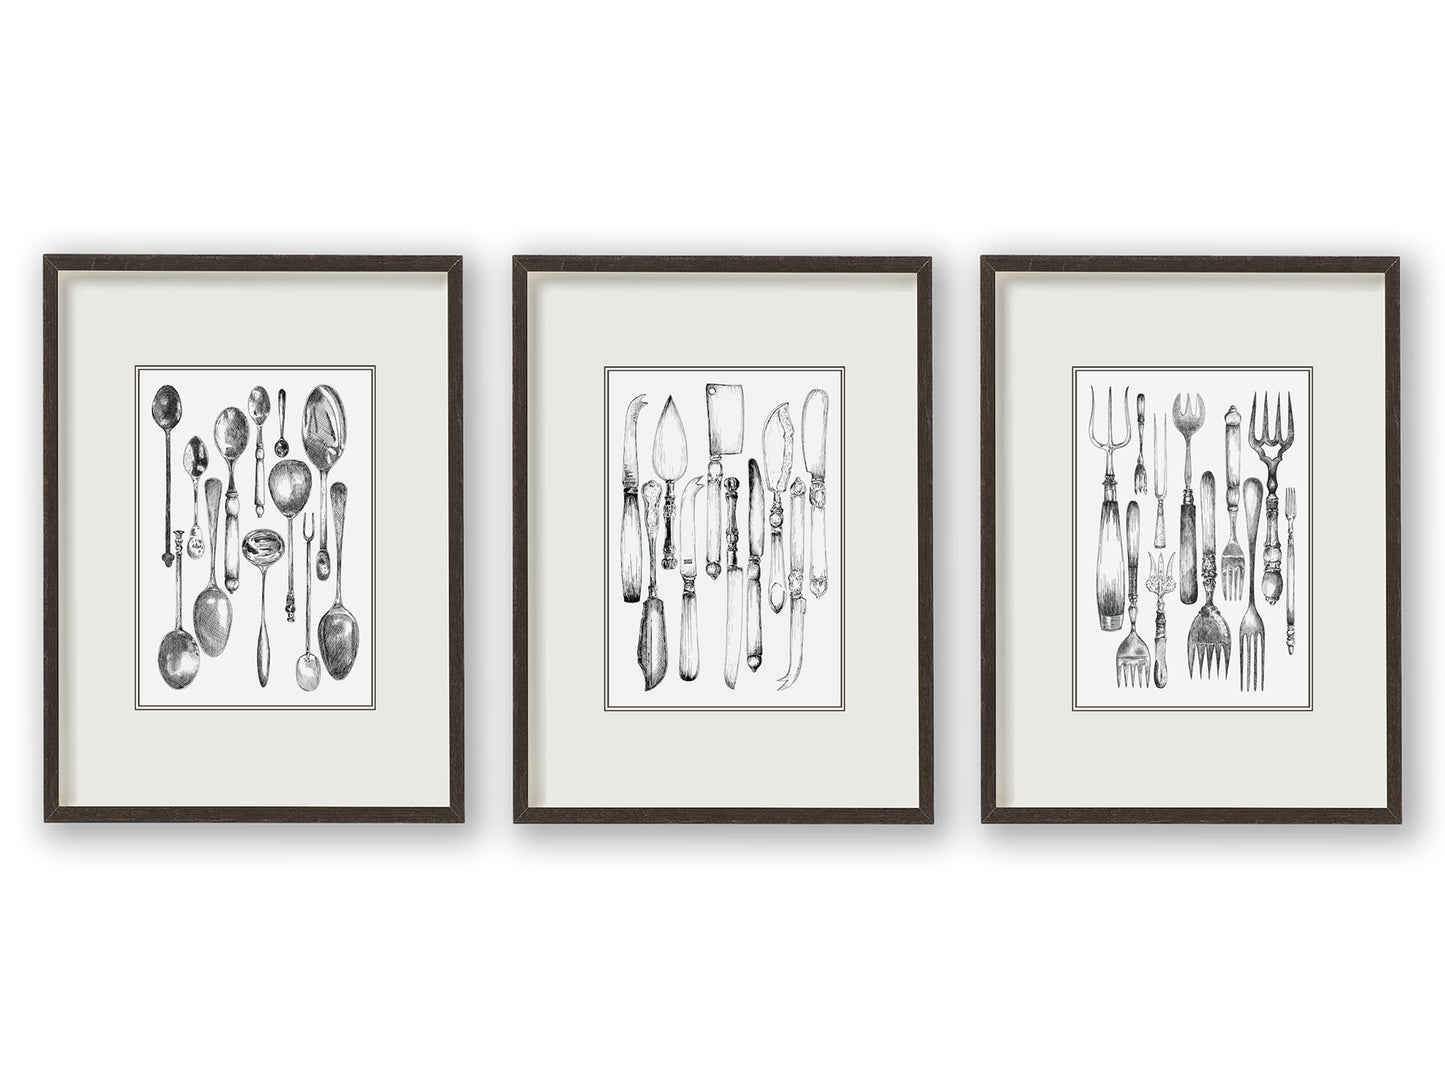 Trio of vintage knife, fork and spoon monochrome illustrations sitting balanced alongside one another, depicted mounted and in black frames